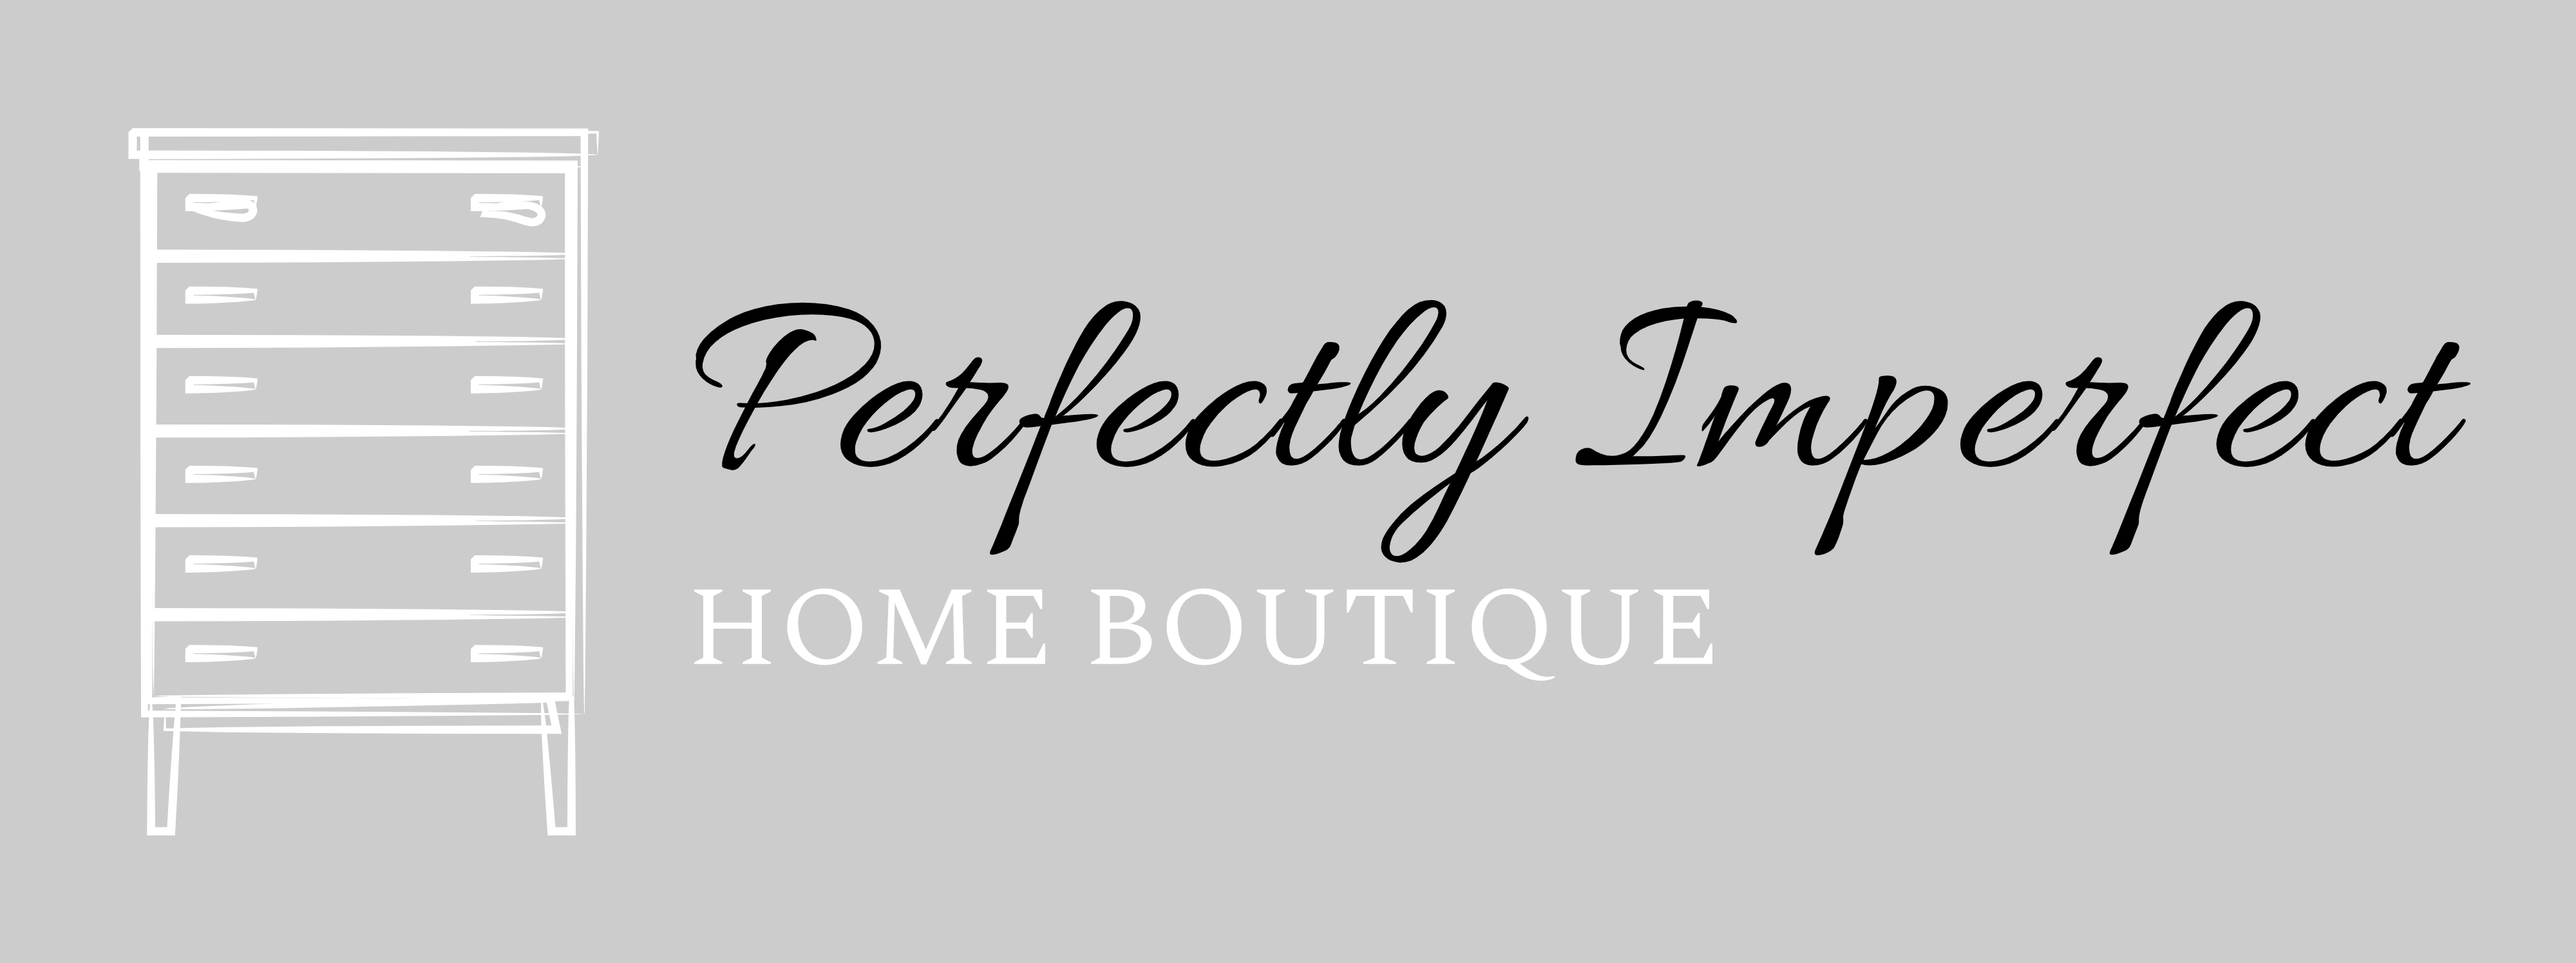 Perfectly Imperfect Home Boutique